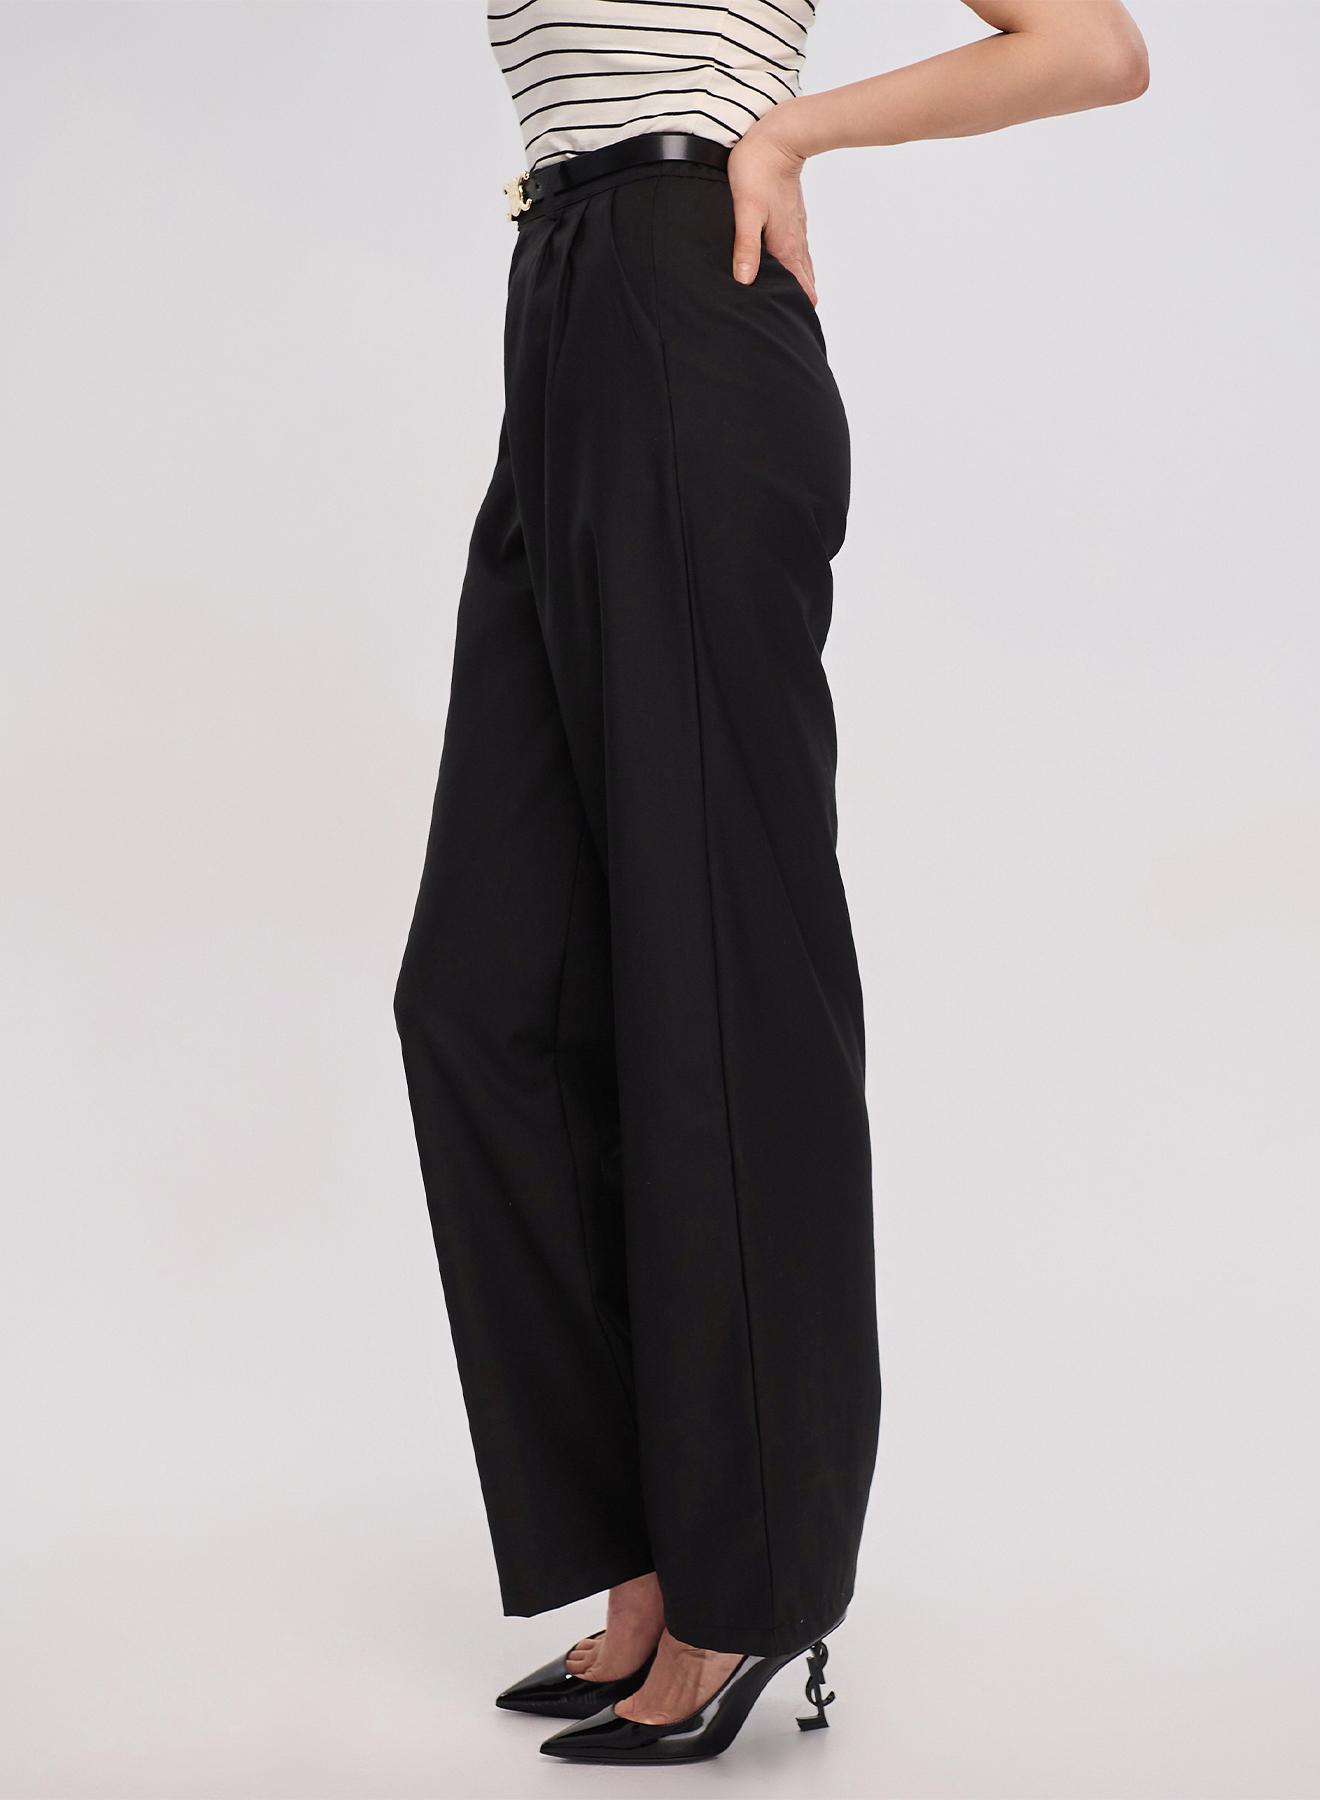 Black wide legs Trousers with pleats My Star - 2